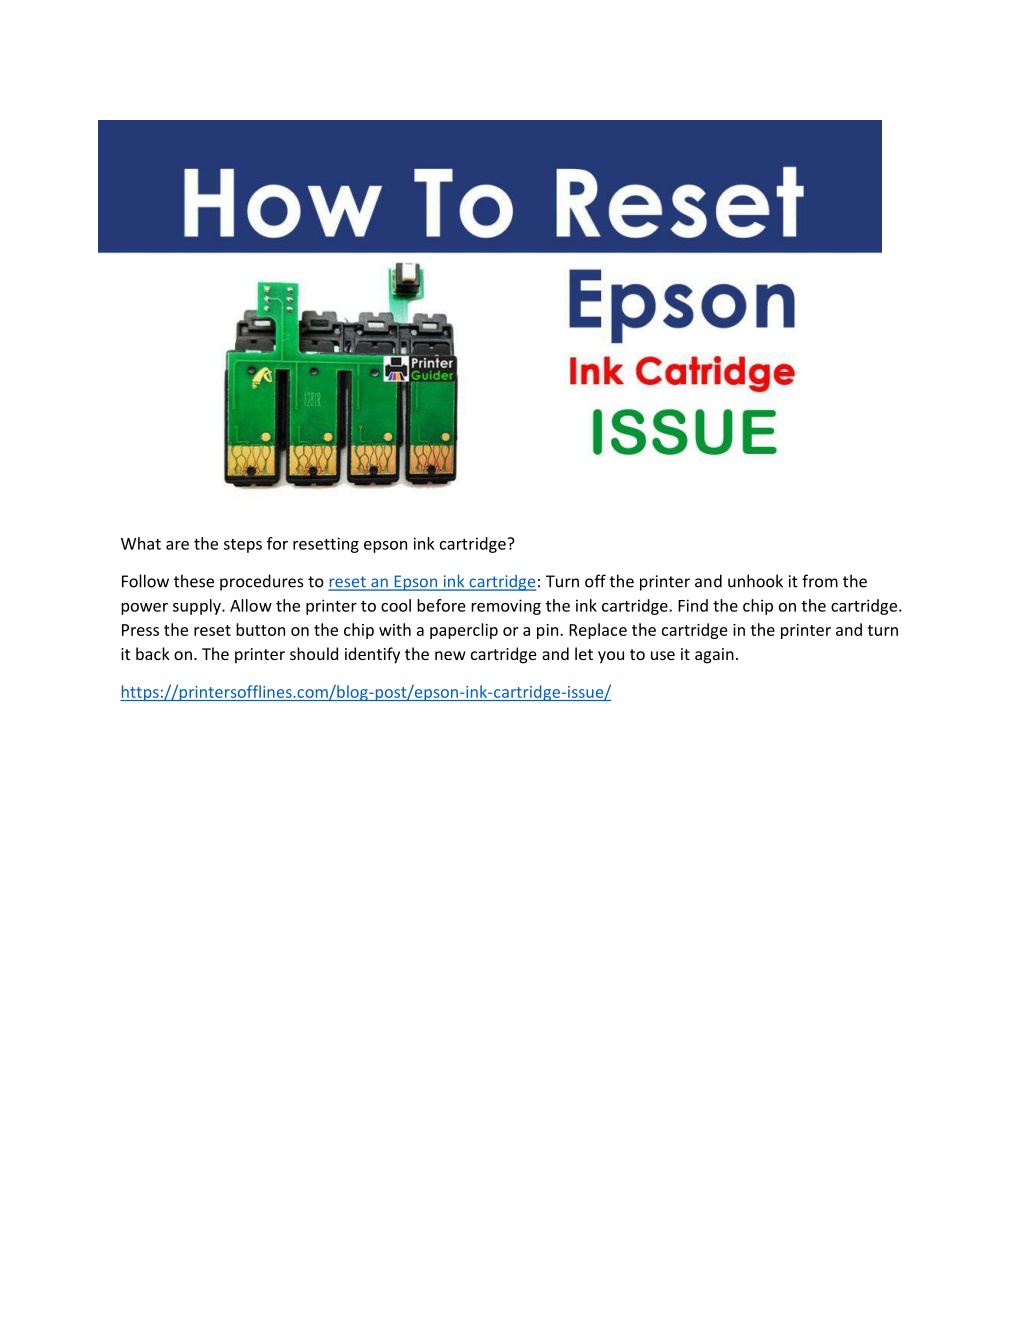 Ppt What Are The Steps For Resetting Epson Ink Cartridge Powerpoint Presentation Id11925479 1821